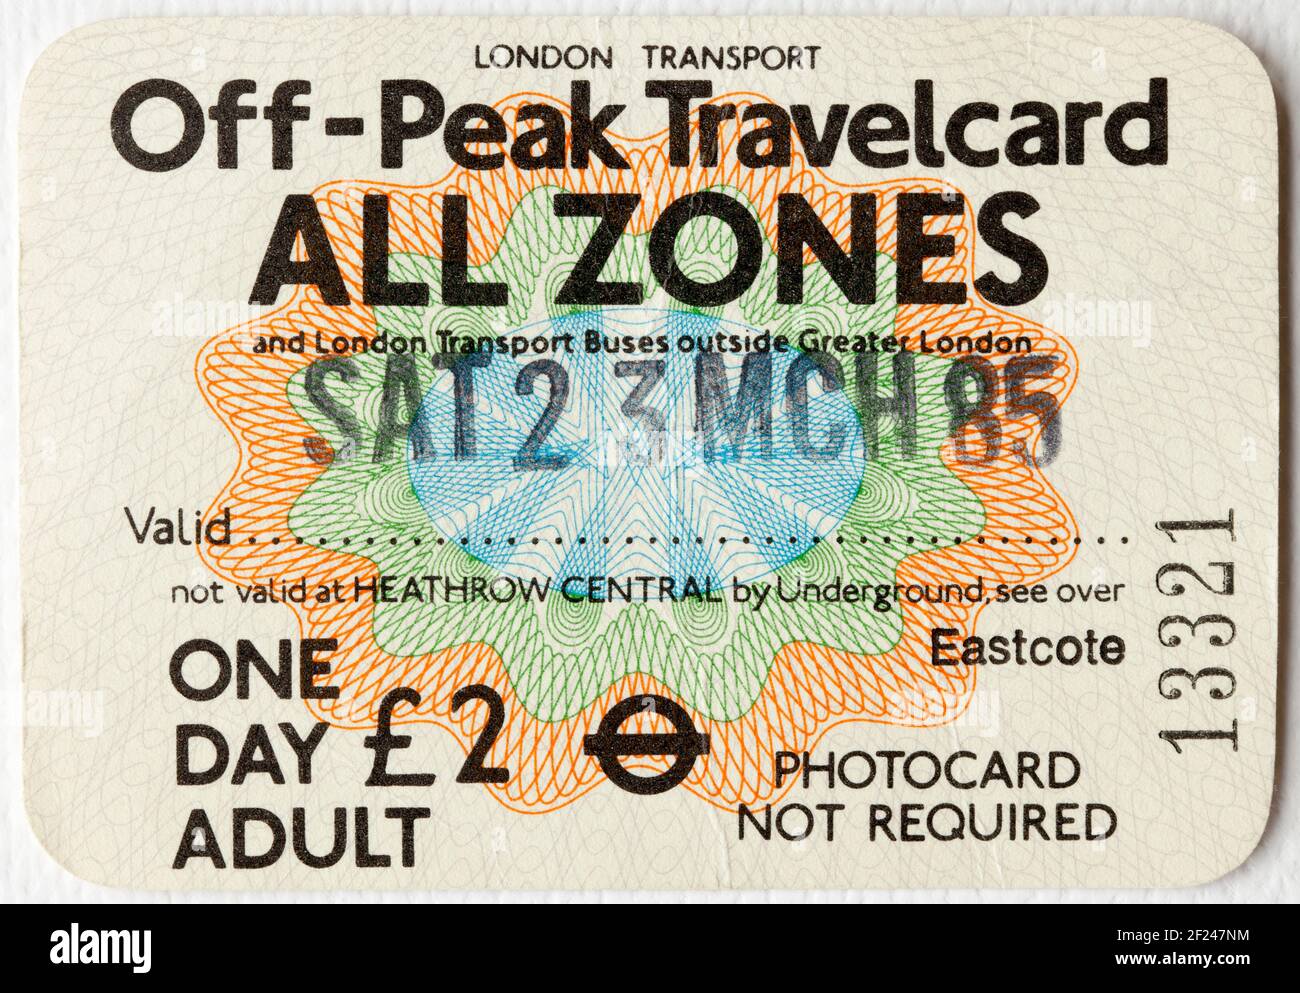 Old London Transport Travelcard Ticket Stock Photo